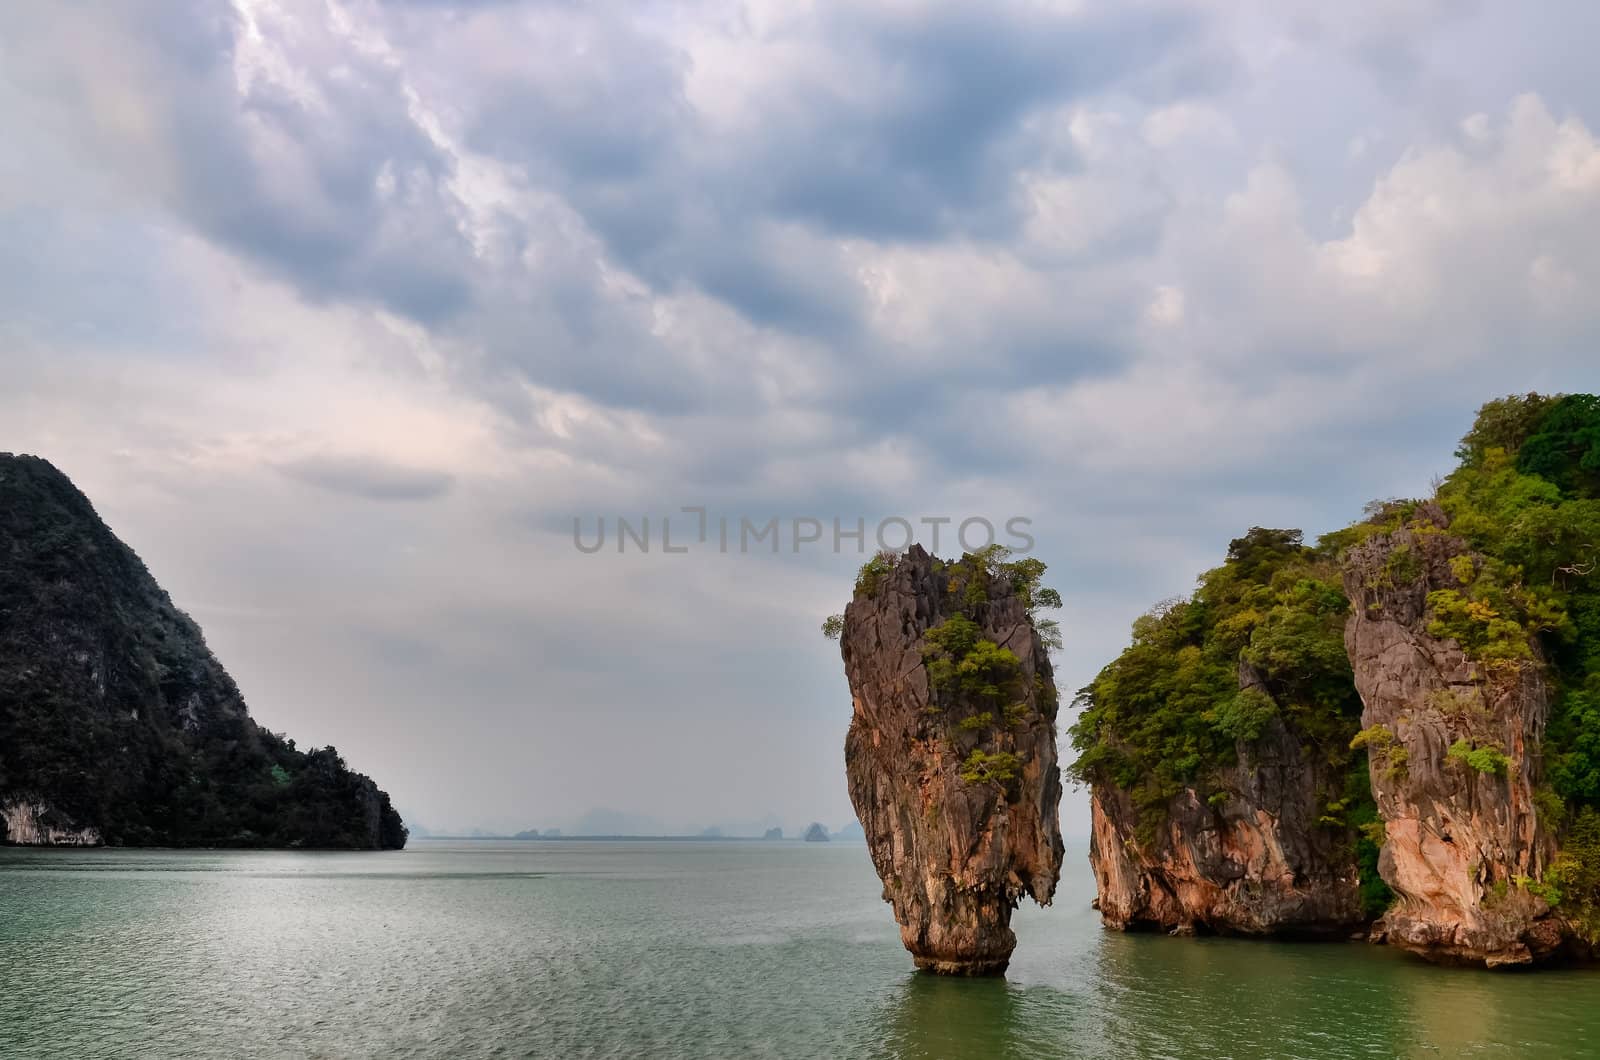 James Bond island ocean view with cloudy sky in Phang Nga bay, A by martinm303